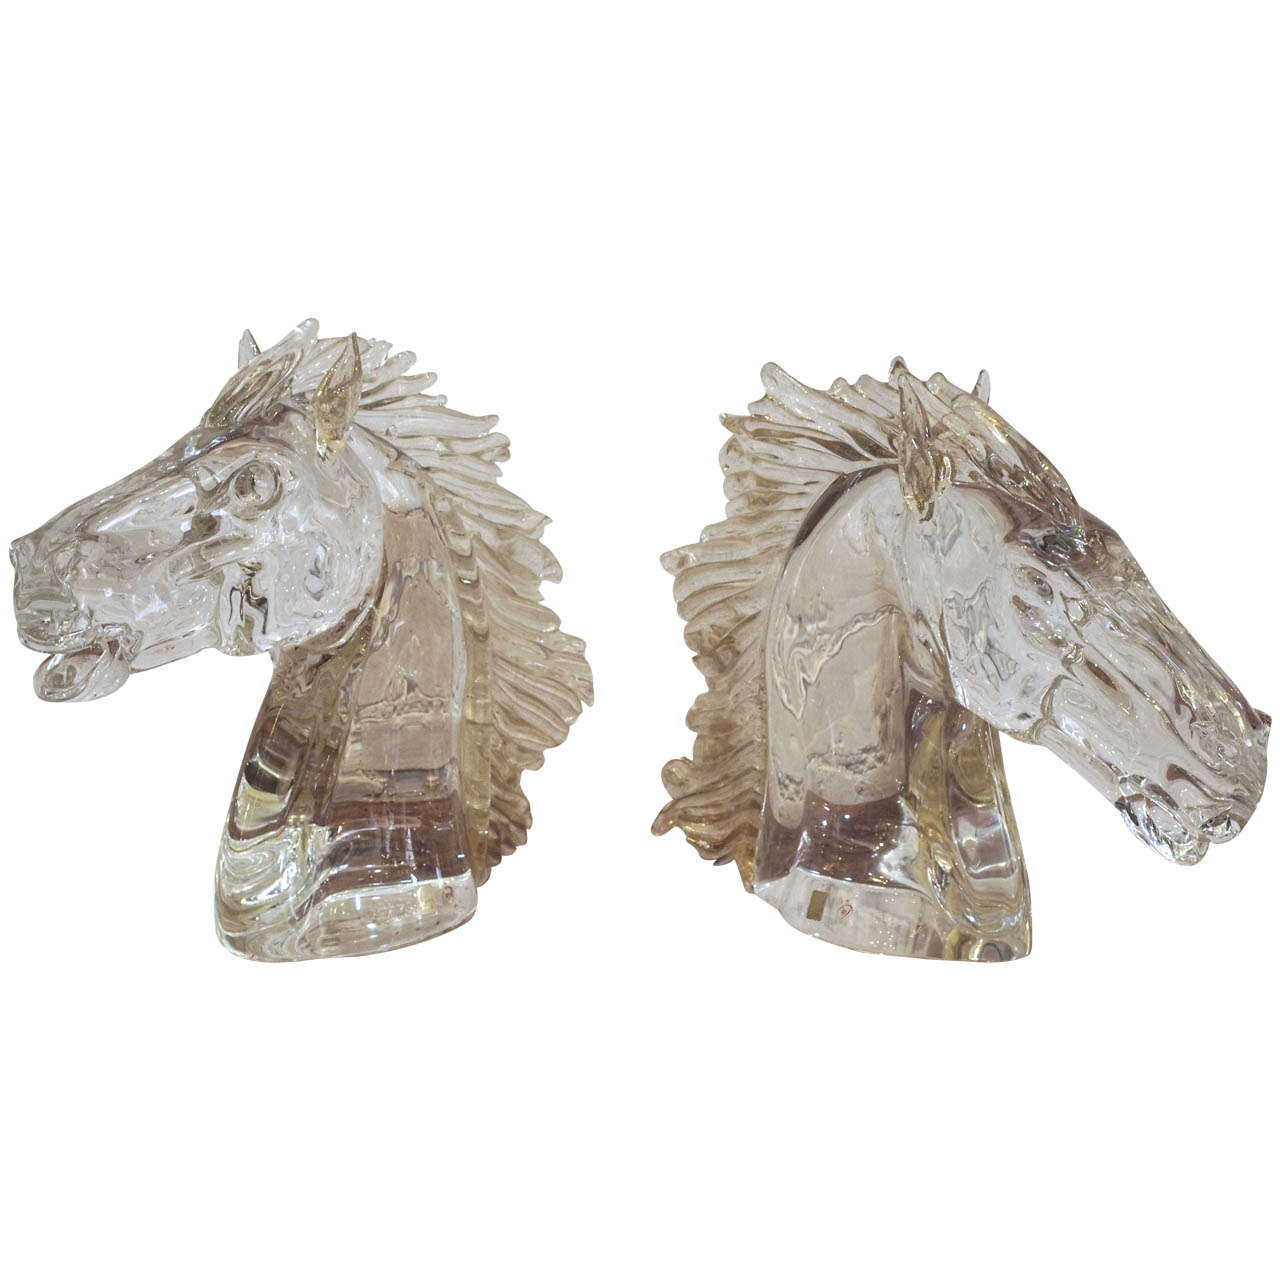 Pair of Horse Heads by Venetian Glassmaster Zanetti For Sale